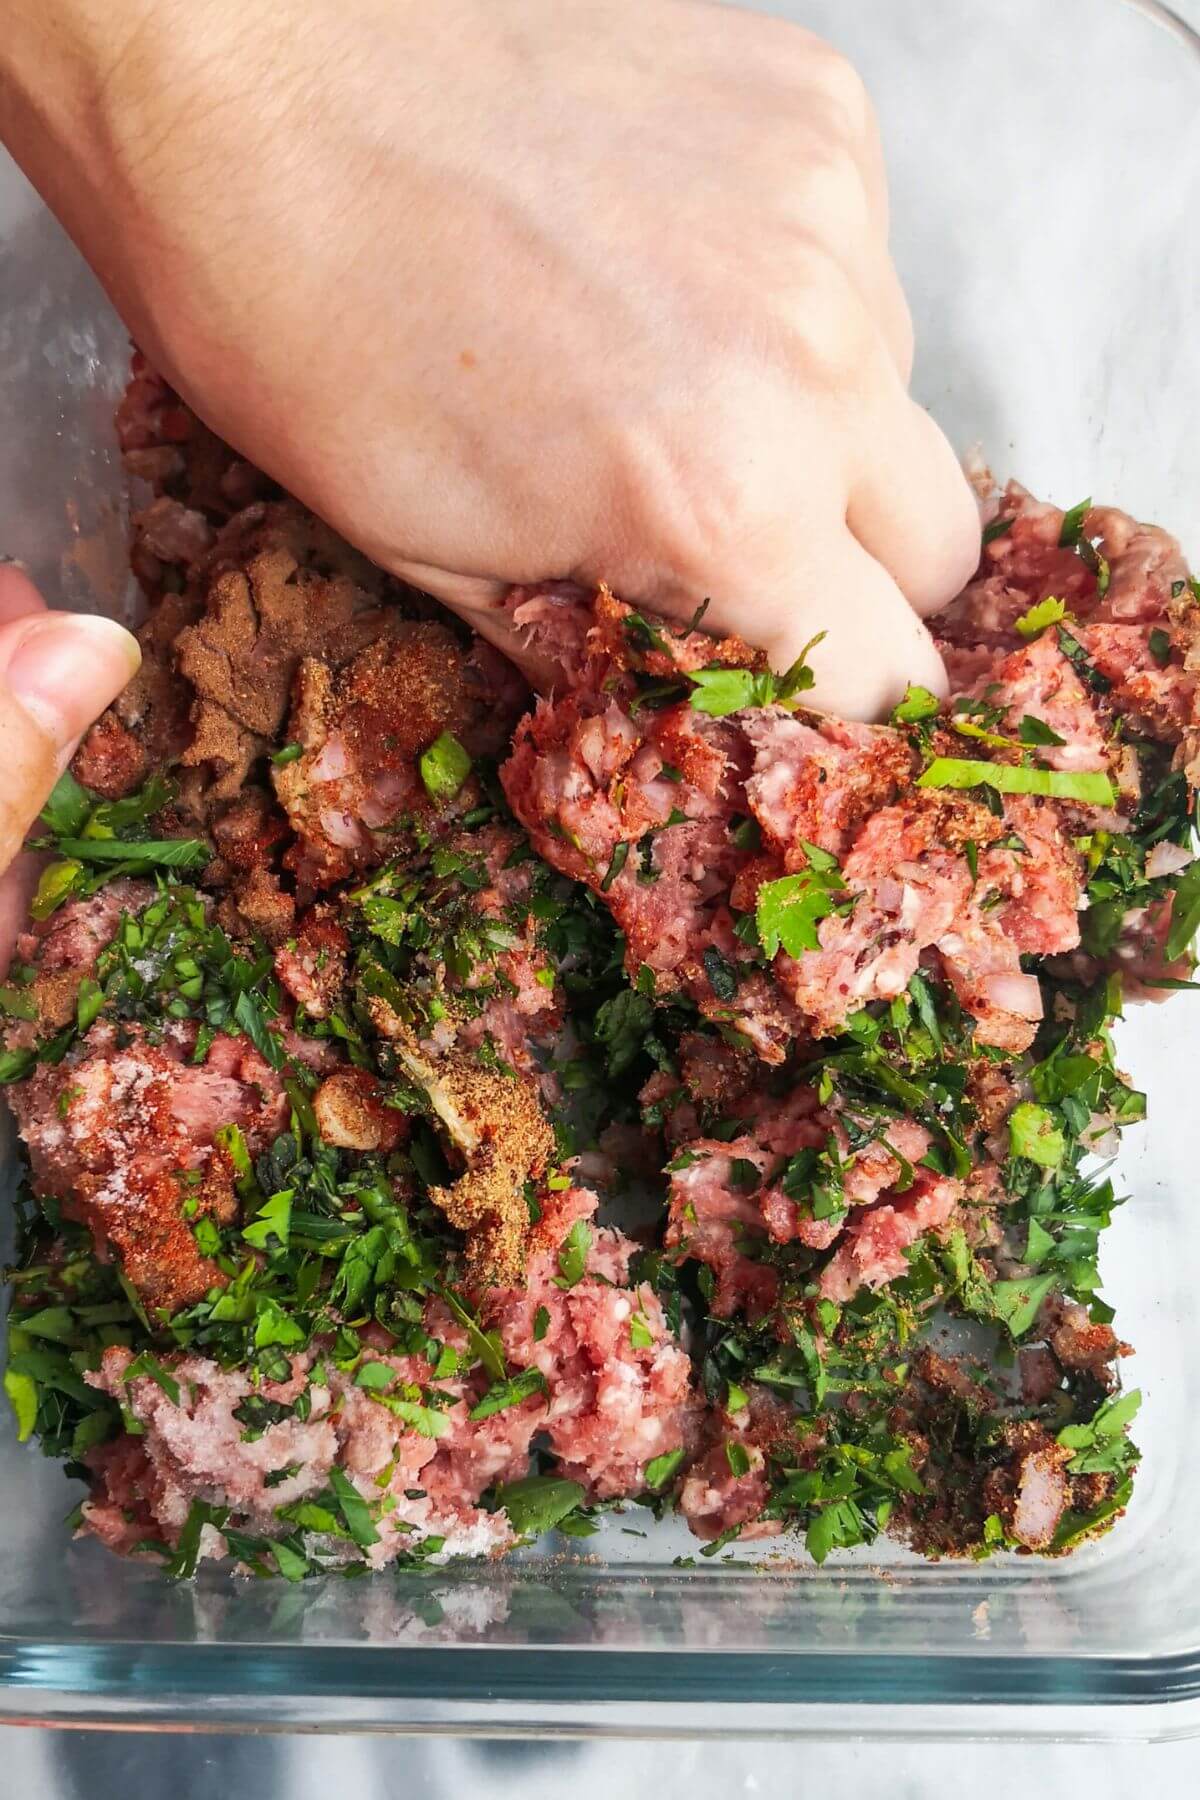 A hand scrunching together the lamb kofta ingredients in a glass container.